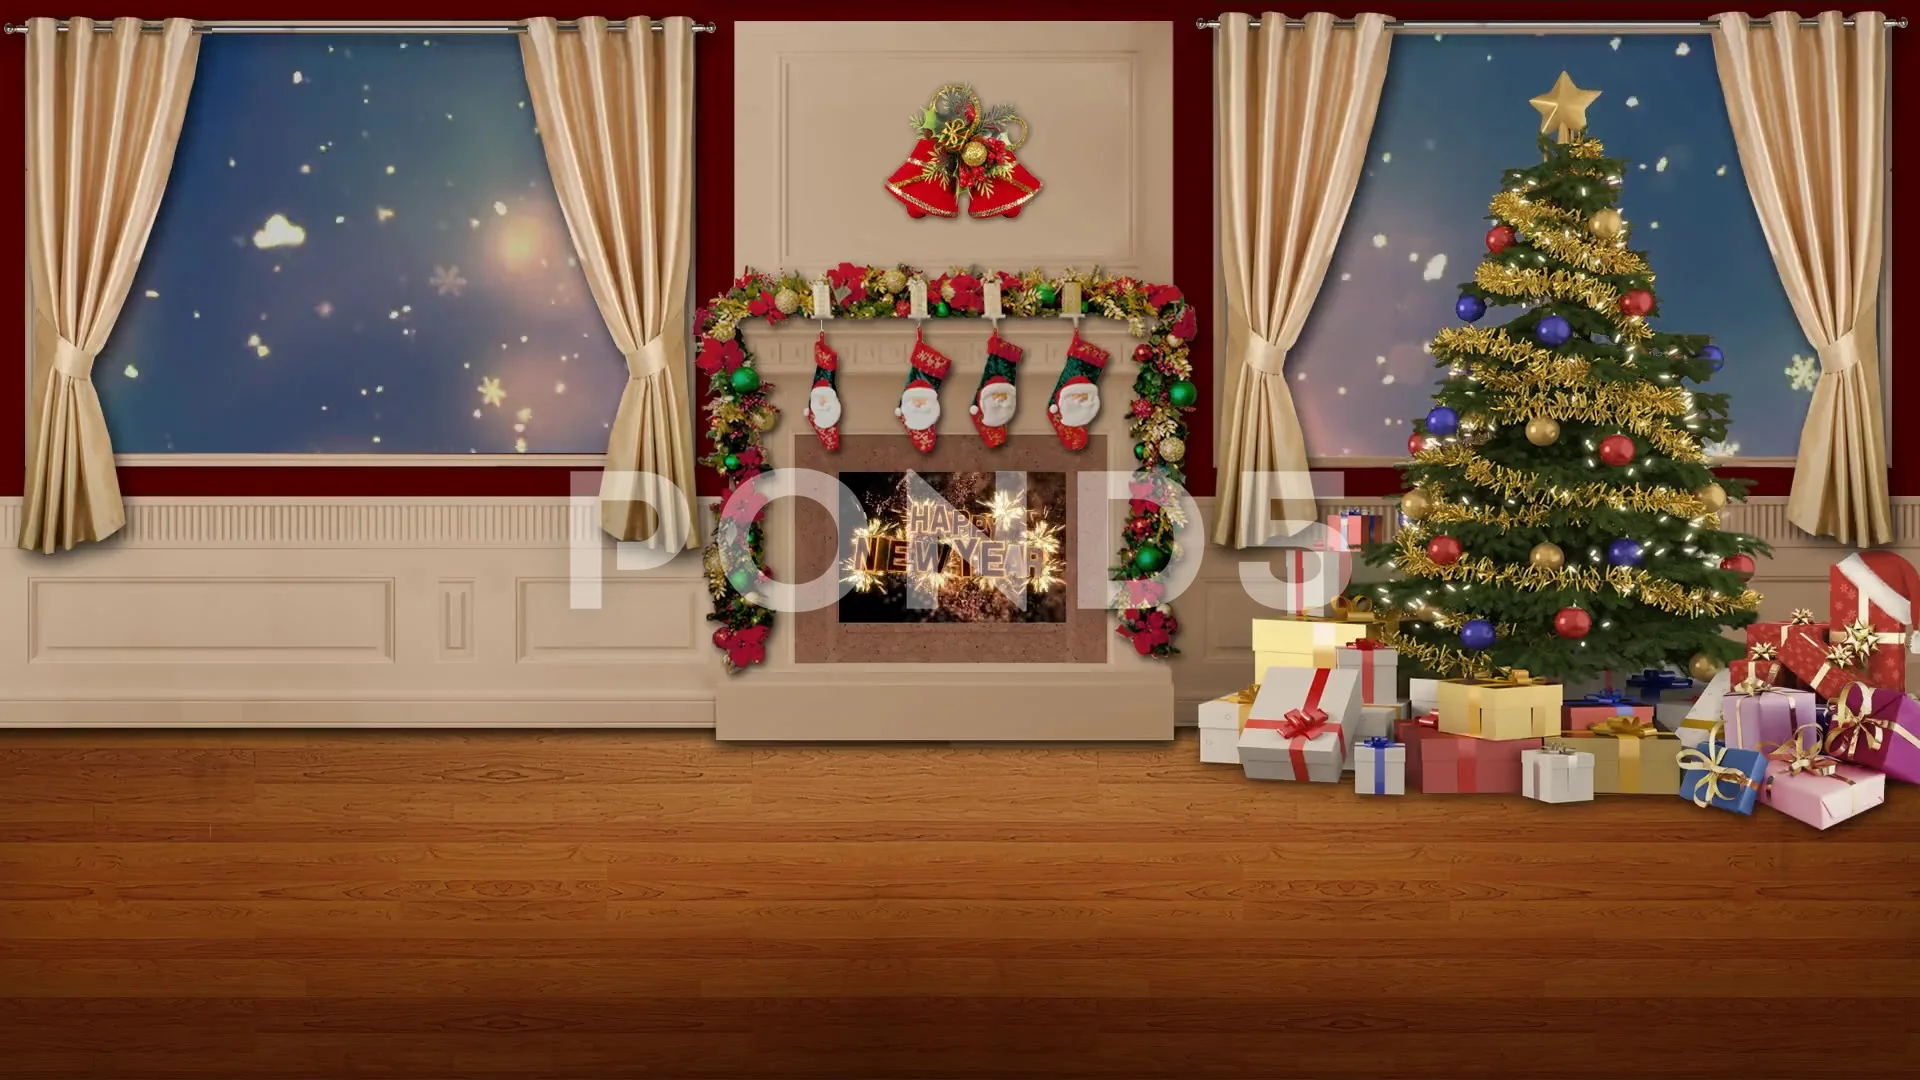 green screen background images, 2012, christmas